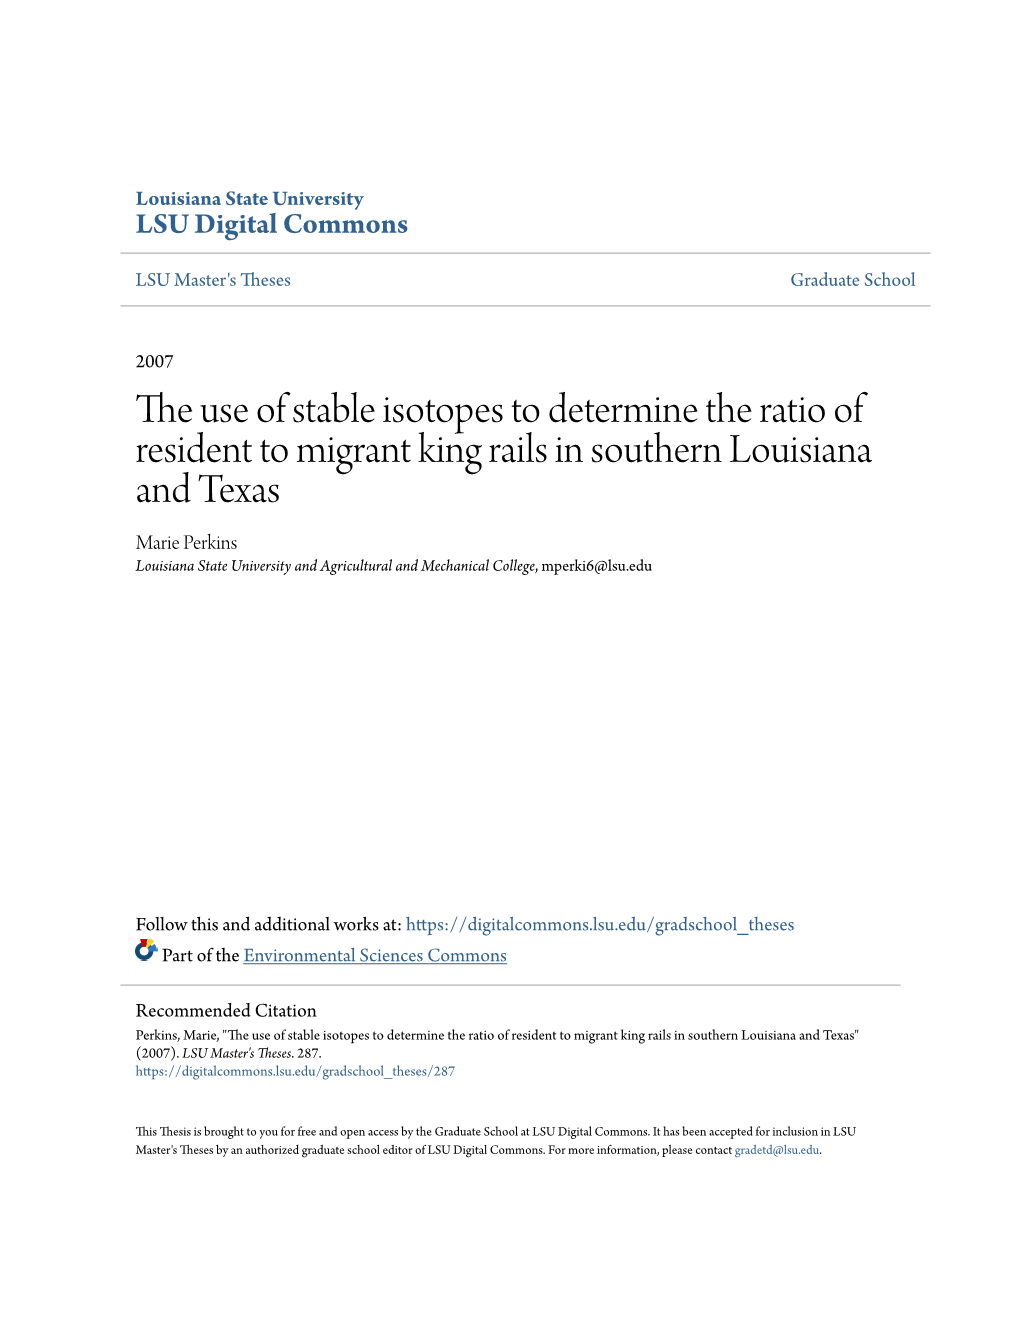 The Use of Stable Isotopes to Determine the Ratio of Resident to Migrant King Rails in Southern Louisiana and Texas" (2007)